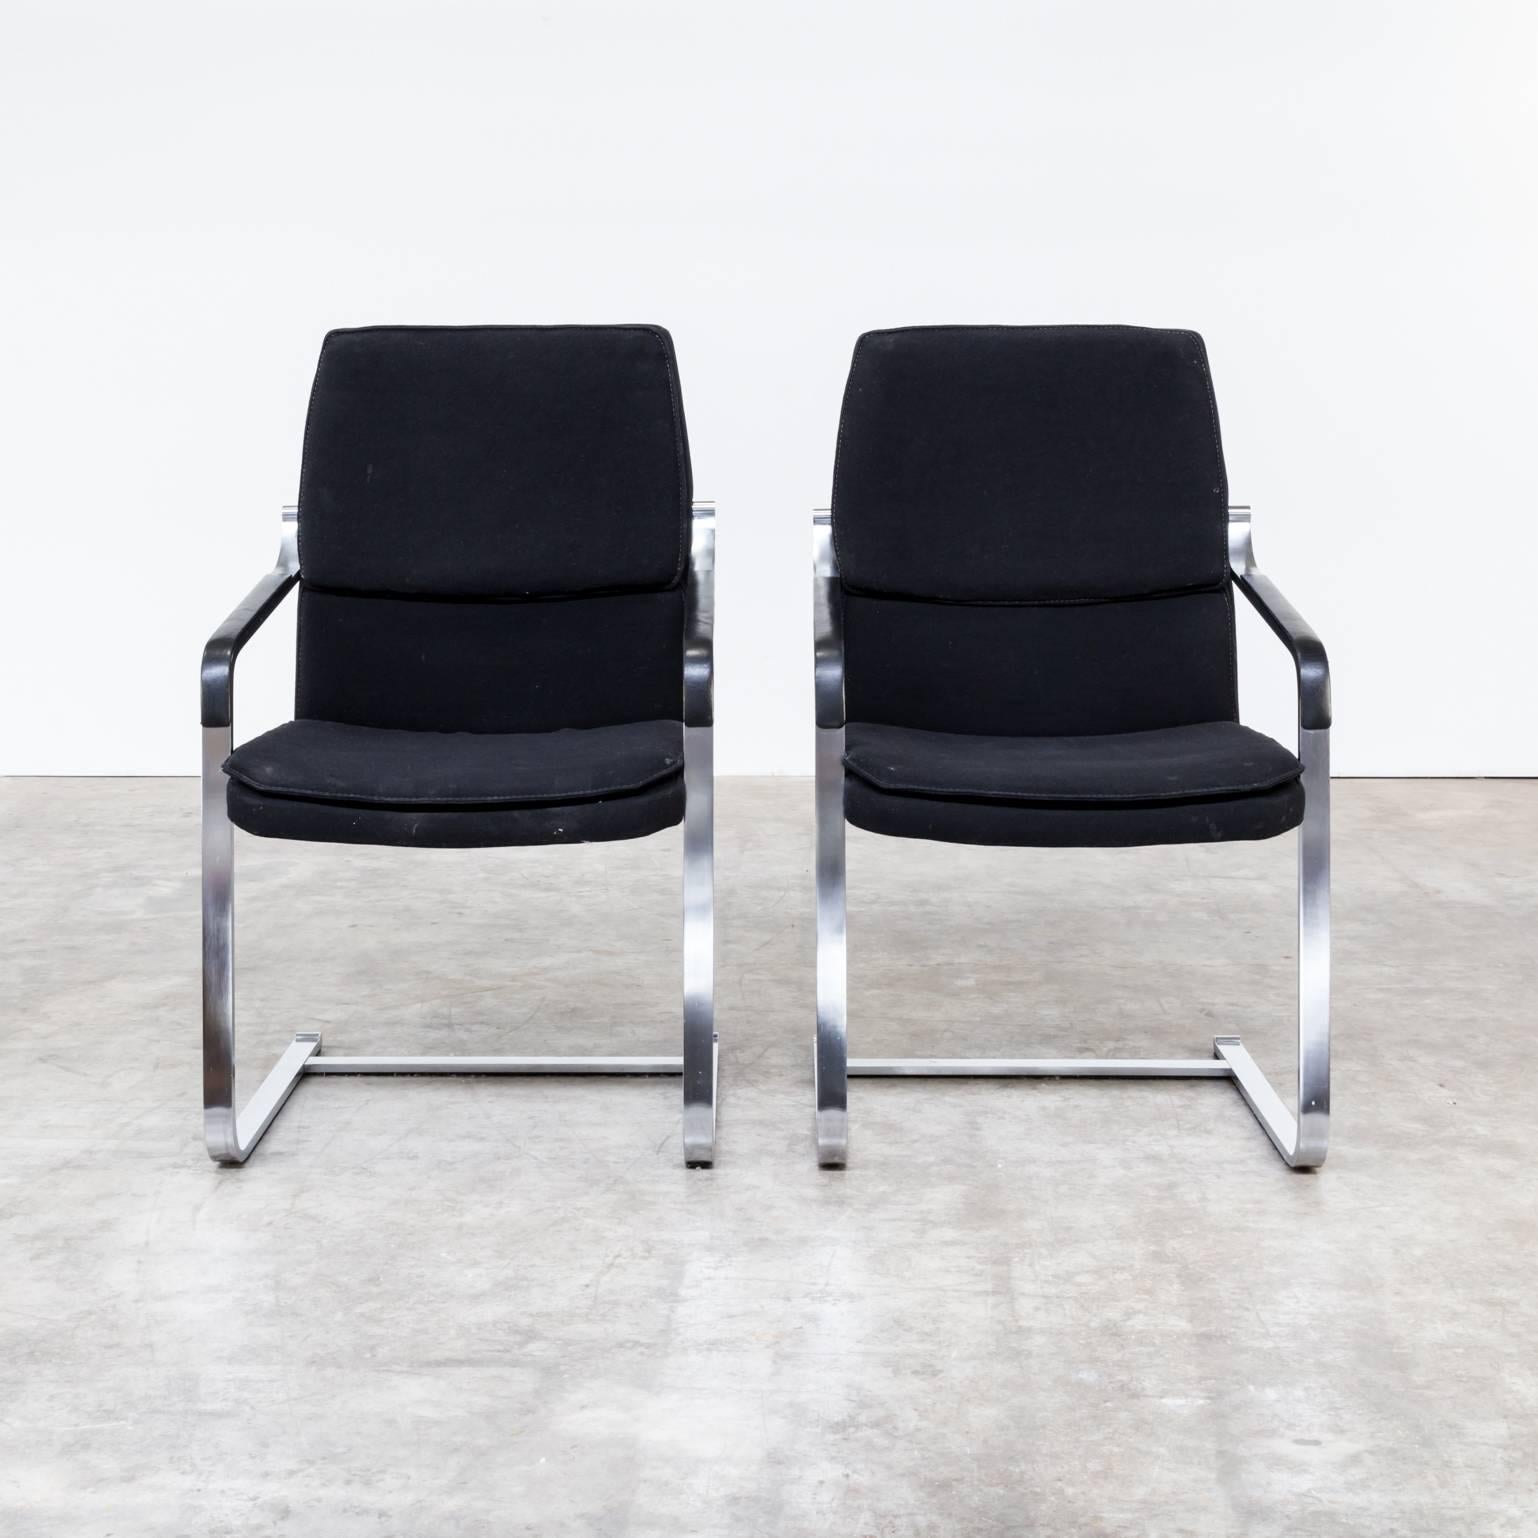 One set of two Walter Knoll chrome framed chairs, black fabric and skai armrest. Very solid framing, fabric worn. Fair condition, wear consistent with age and use.